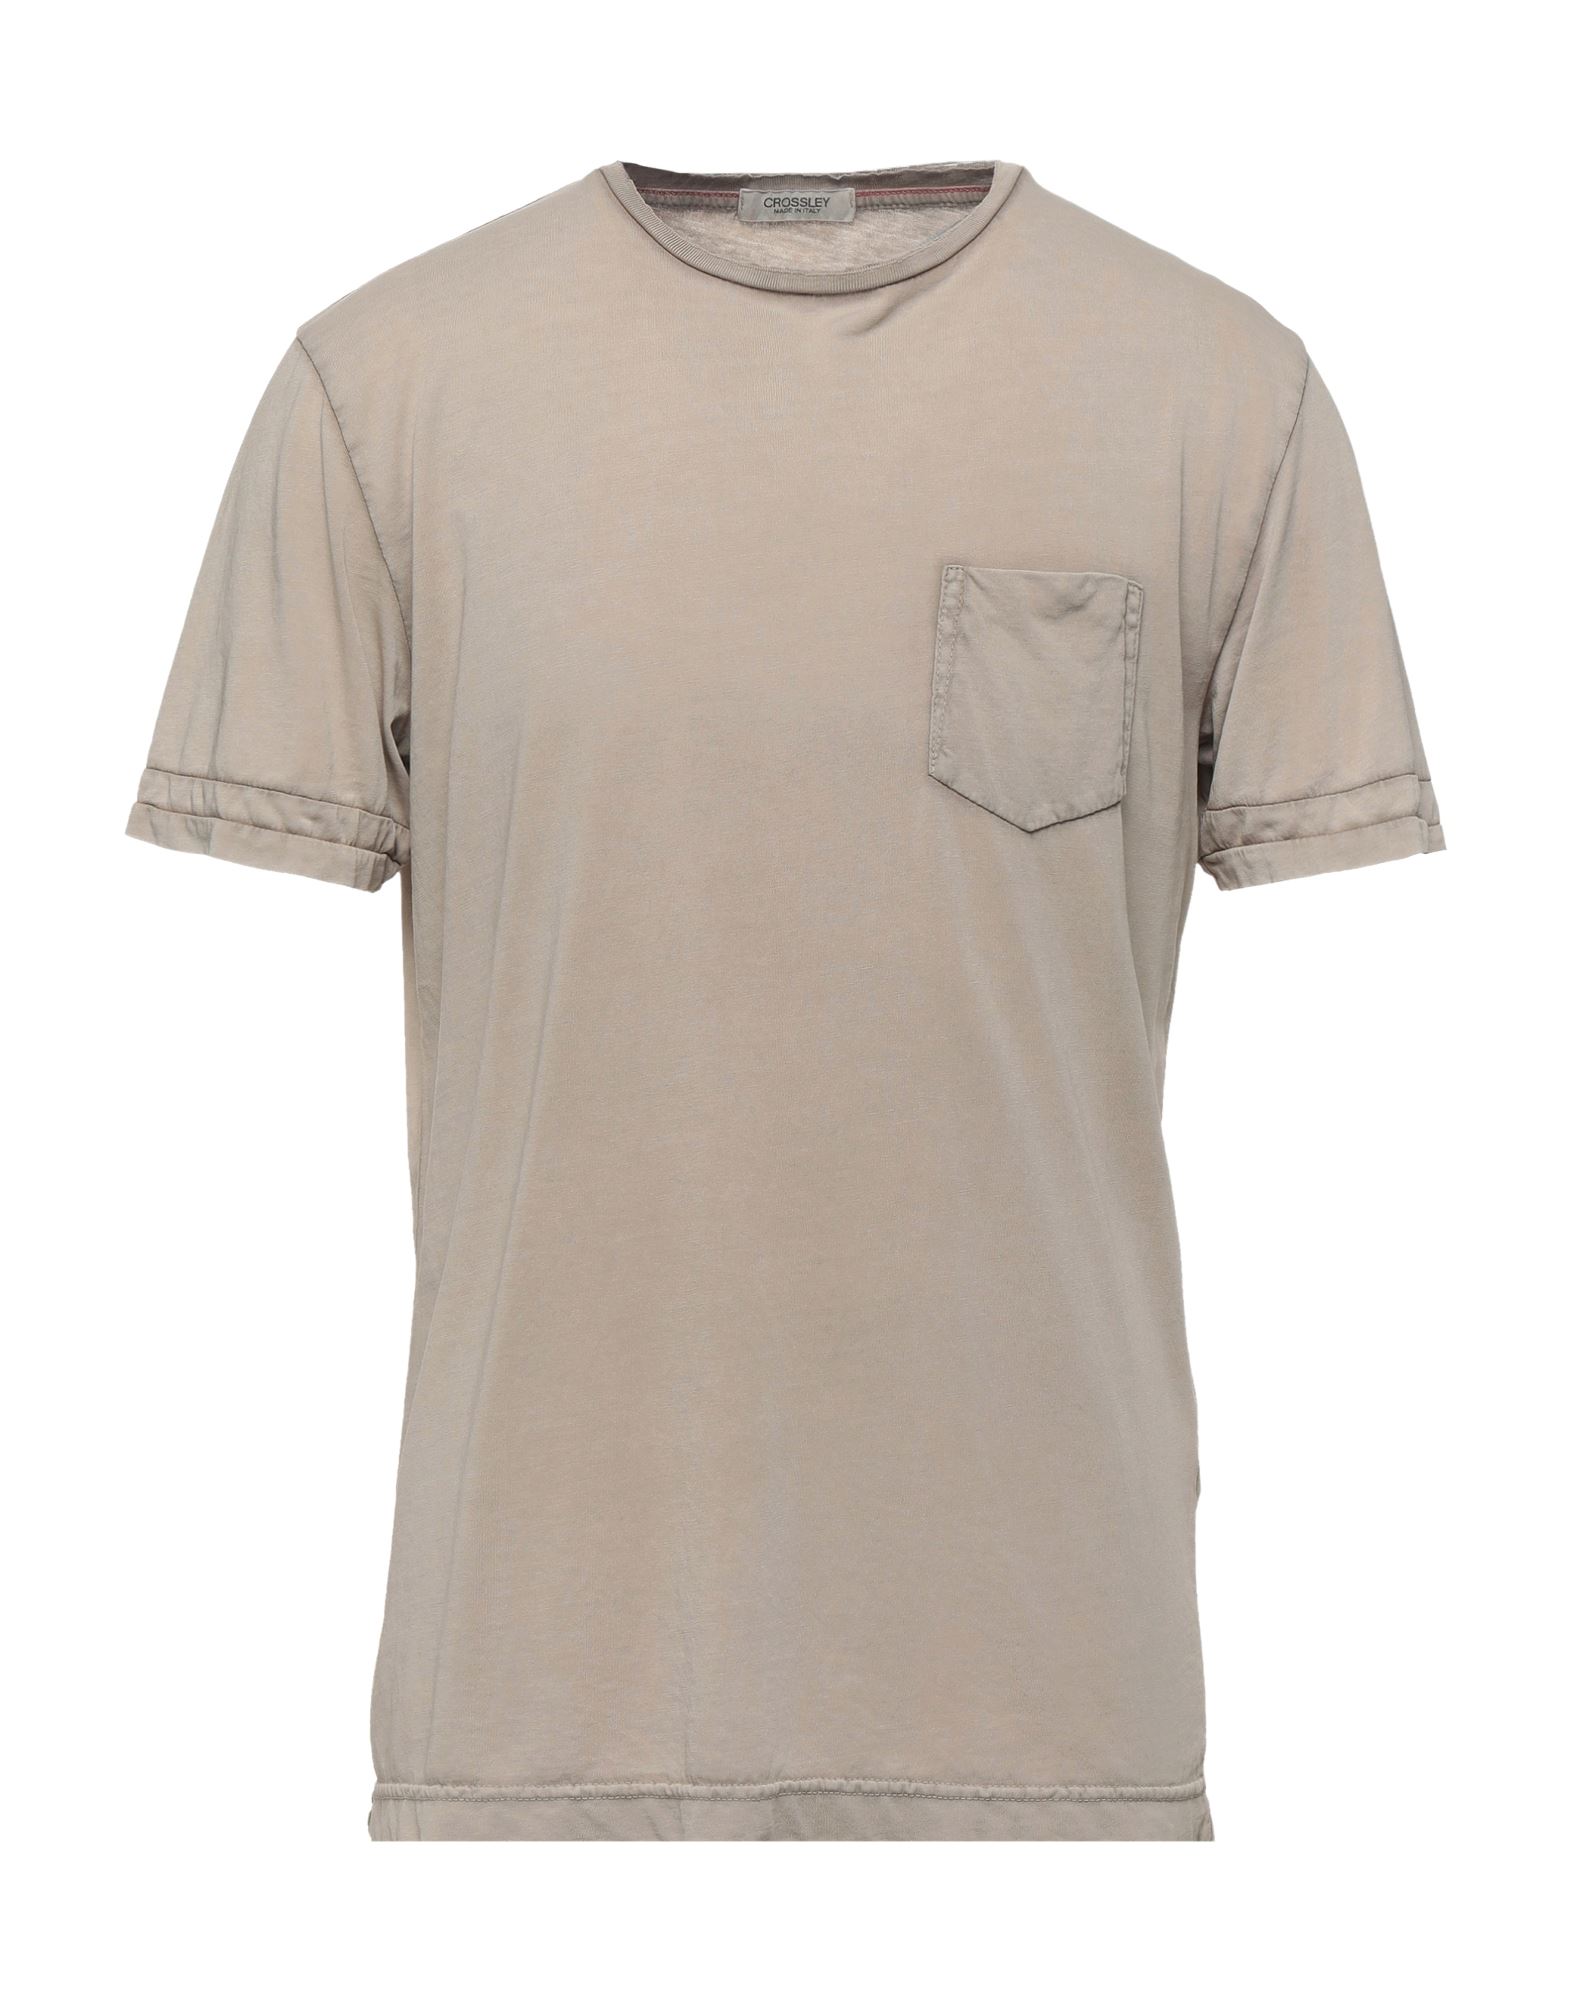 Crossley T-shirts In Sand